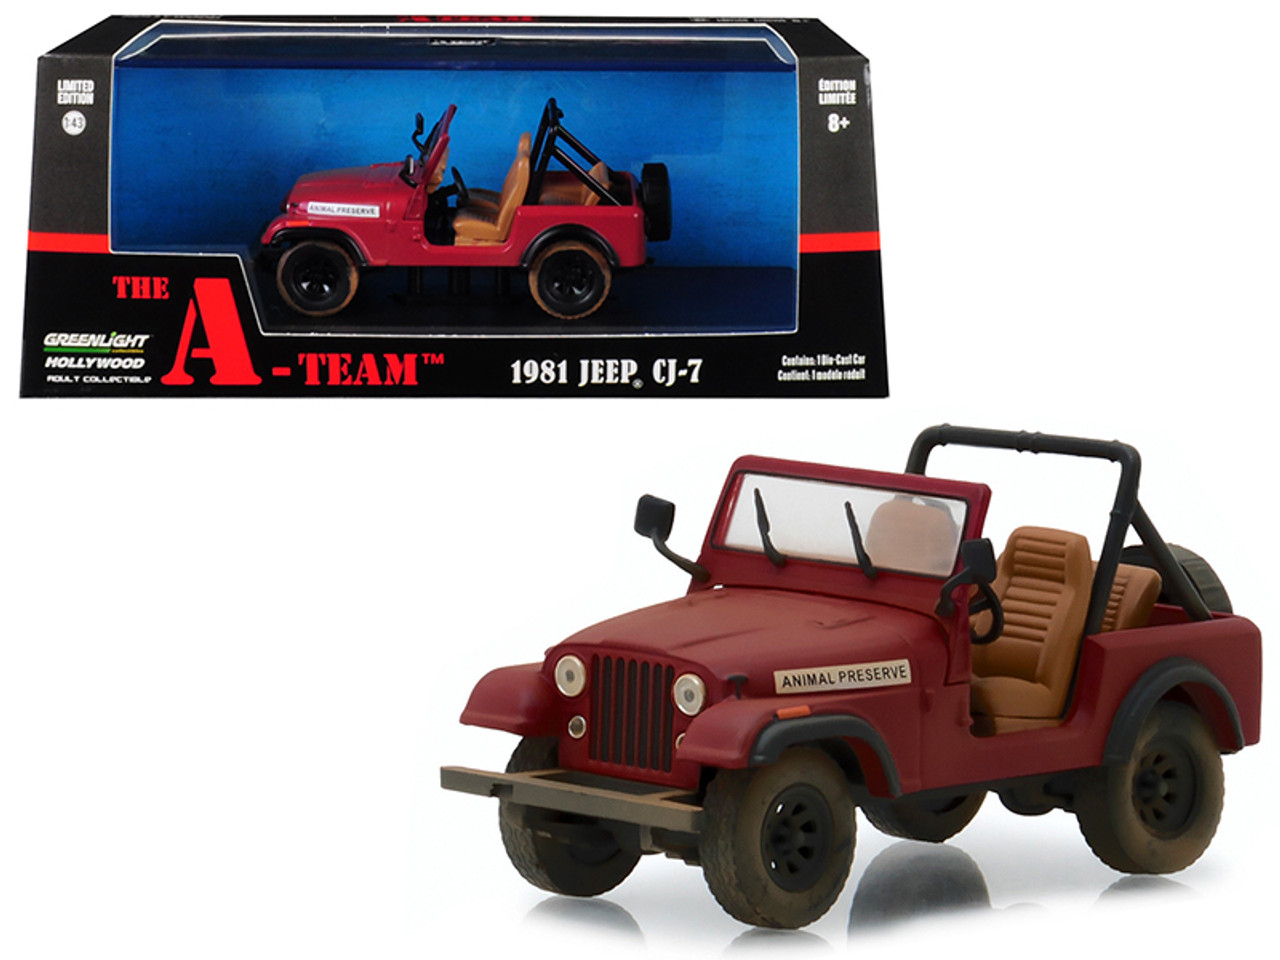 1981 Jeep CJ-7 "Animal Preserve" Red "The A-Team" (1983-1987) TV Series 1/43 Diecast Model Car by Greenlight